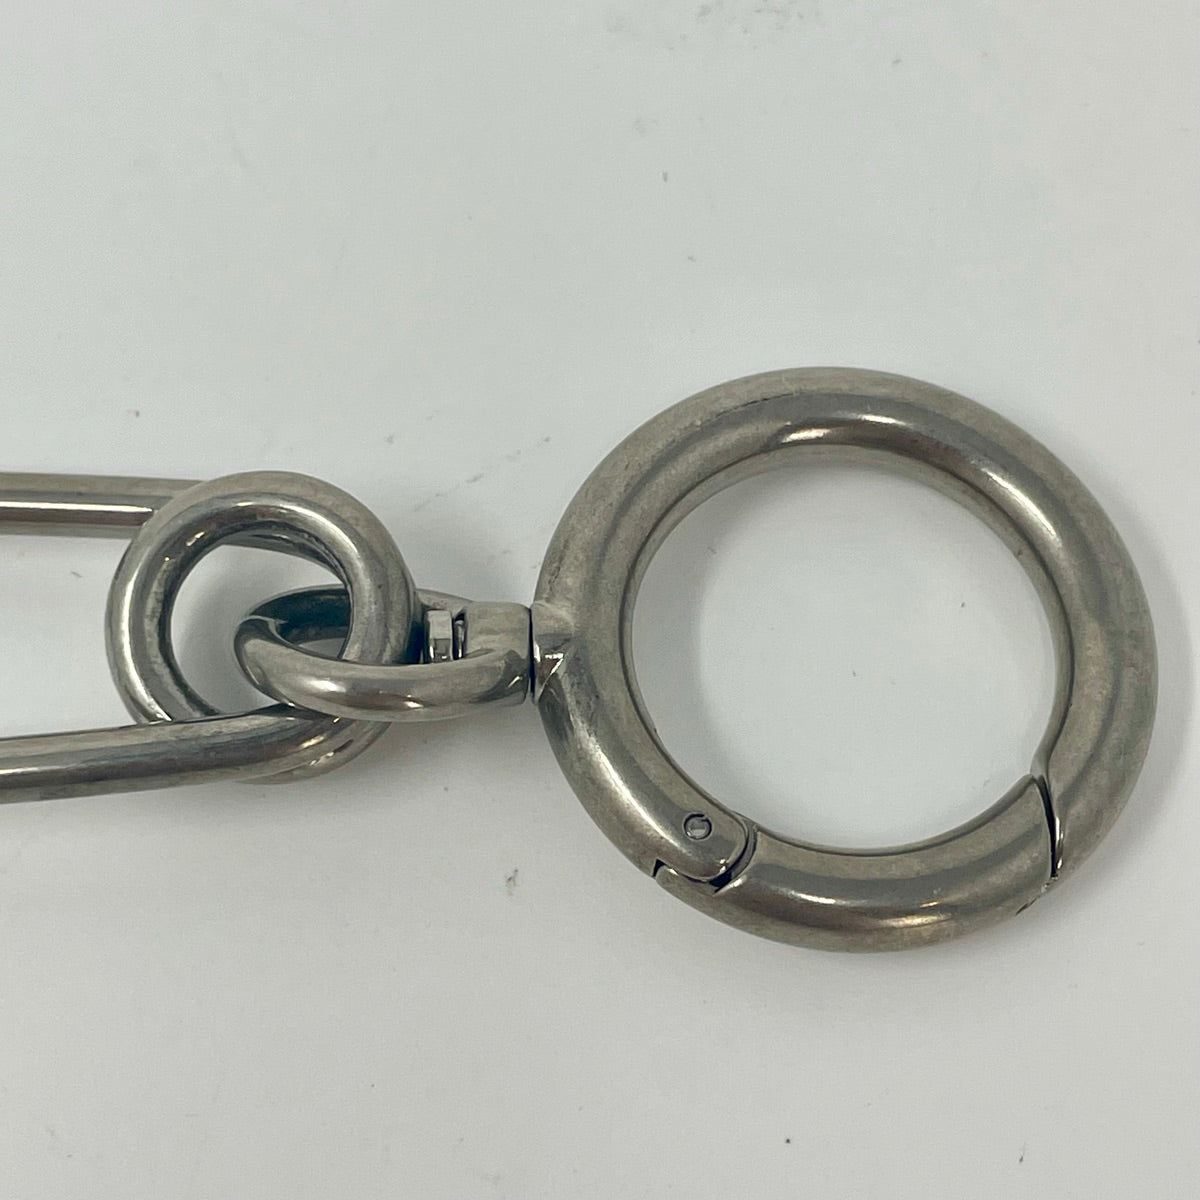 Burberry Safety Pin Keyring